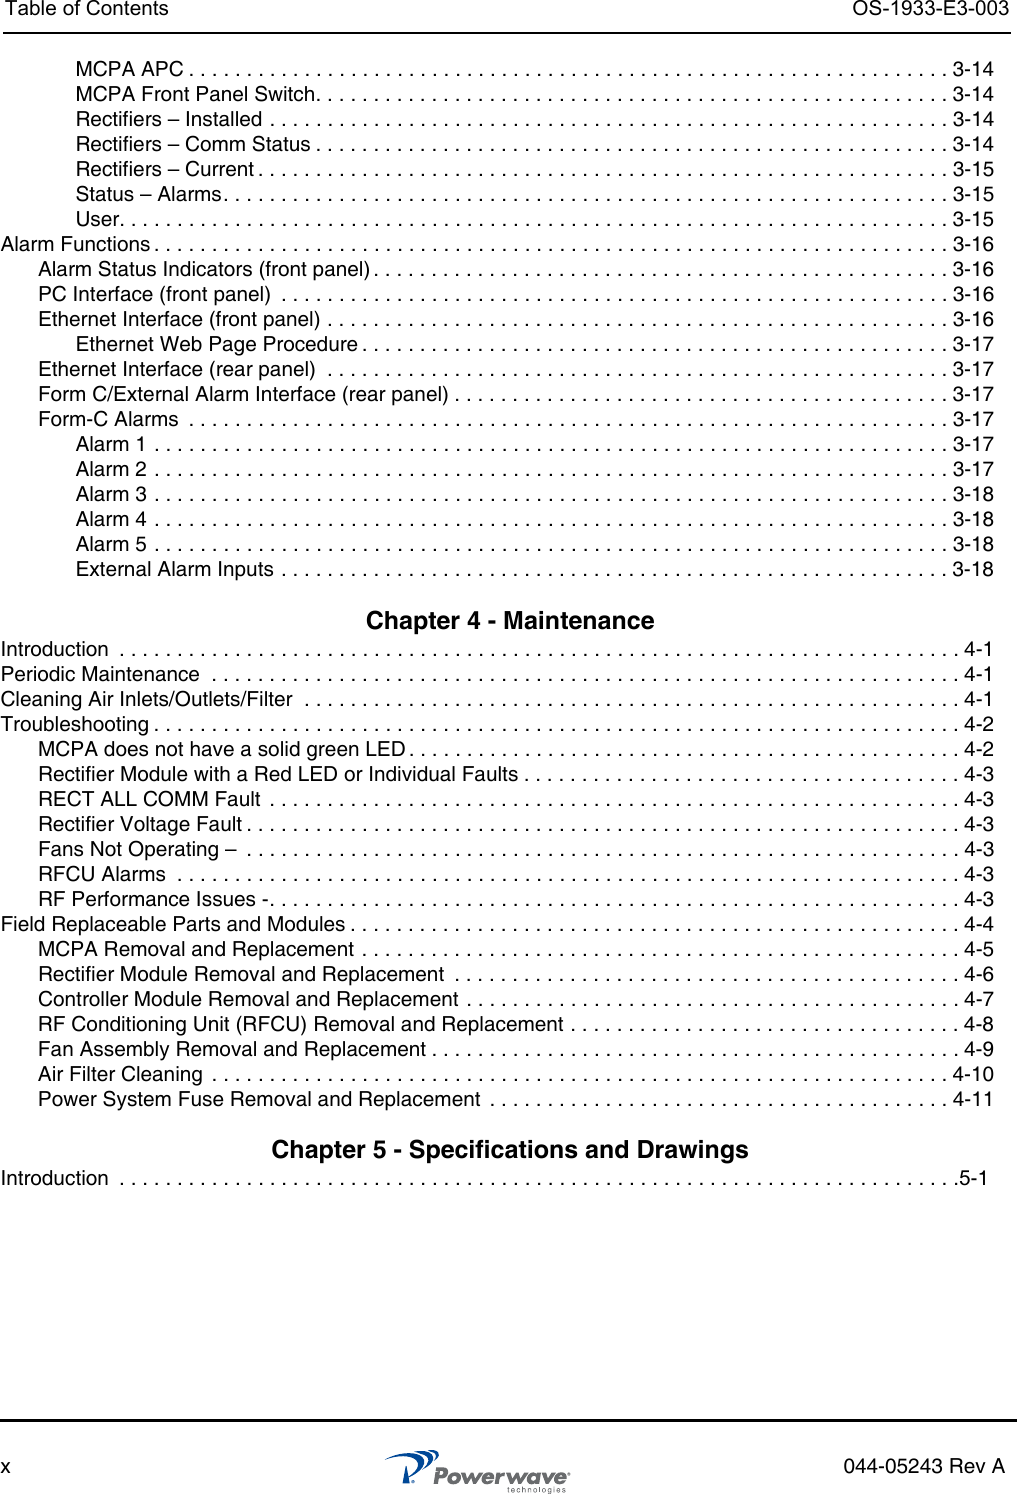 Table of Contents OS-1933-E3-003x044-05243 Rev AMCPA APC . . . . . . . . . . . . . . . . . . . . . . . . . . . . . . . . . . . . . . . . . . . . . . . . . . . . . . . . . . . . . . . . . . 3-14MCPA Front Panel Switch. . . . . . . . . . . . . . . . . . . . . . . . . . . . . . . . . . . . . . . . . . . . . . . . . . . . . . . 3-14Rectifiers – Installed . . . . . . . . . . . . . . . . . . . . . . . . . . . . . . . . . . . . . . . . . . . . . . . . . . . . . . . . . . . 3-14Rectifiers – Comm Status . . . . . . . . . . . . . . . . . . . . . . . . . . . . . . . . . . . . . . . . . . . . . . . . . . . . . . . 3-14Rectifiers – Current . . . . . . . . . . . . . . . . . . . . . . . . . . . . . . . . . . . . . . . . . . . . . . . . . . . . . . . . . . . . 3-15Status – Alarms. . . . . . . . . . . . . . . . . . . . . . . . . . . . . . . . . . . . . . . . . . . . . . . . . . . . . . . . . . . . . . . 3-15User. . . . . . . . . . . . . . . . . . . . . . . . . . . . . . . . . . . . . . . . . . . . . . . . . . . . . . . . . . . . . . . . . . . . . . . . 3-15Alarm Functions . . . . . . . . . . . . . . . . . . . . . . . . . . . . . . . . . . . . . . . . . . . . . . . . . . . . . . . . . . . . . . . . . . . . . 3-16Alarm Status Indicators (front panel) . . . . . . . . . . . . . . . . . . . . . . . . . . . . . . . . . . . . . . . . . . . . . . . . . . 3-16PC Interface (front panel)  . . . . . . . . . . . . . . . . . . . . . . . . . . . . . . . . . . . . . . . . . . . . . . . . . . . . . . . . . . 3-16Ethernet Interface (front panel) . . . . . . . . . . . . . . . . . . . . . . . . . . . . . . . . . . . . . . . . . . . . . . . . . . . . . . 3-16Ethernet Web Page Procedure . . . . . . . . . . . . . . . . . . . . . . . . . . . . . . . . . . . . . . . . . . . . . . . . . . .3-17Ethernet Interface (rear panel)  . . . . . . . . . . . . . . . . . . . . . . . . . . . . . . . . . . . . . . . . . . . . . . . . . . . . . . 3-17Form C/External Alarm Interface (rear panel) . . . . . . . . . . . . . . . . . . . . . . . . . . . . . . . . . . . . . . . . . . .3-17Form-C Alarms  . . . . . . . . . . . . . . . . . . . . . . . . . . . . . . . . . . . . . . . . . . . . . . . . . . . . . . . . . . . . . . . . . . 3-17Alarm 1 . . . . . . . . . . . . . . . . . . . . . . . . . . . . . . . . . . . . . . . . . . . . . . . . . . . . . . . . . . . . . . . . . . . . . 3-17Alarm 2 . . . . . . . . . . . . . . . . . . . . . . . . . . . . . . . . . . . . . . . . . . . . . . . . . . . . . . . . . . . . . . . . . . . . . 3-17Alarm 3 . . . . . . . . . . . . . . . . . . . . . . . . . . . . . . . . . . . . . . . . . . . . . . . . . . . . . . . . . . . . . . . . . . . . . 3-18Alarm 4 . . . . . . . . . . . . . . . . . . . . . . . . . . . . . . . . . . . . . . . . . . . . . . . . . . . . . . . . . . . . . . . . . . . . . 3-18Alarm 5 . . . . . . . . . . . . . . . . . . . . . . . . . . . . . . . . . . . . . . . . . . . . . . . . . . . . . . . . . . . . . . . . . . . . . 3-18External Alarm Inputs . . . . . . . . . . . . . . . . . . . . . . . . . . . . . . . . . . . . . . . . . . . . . . . . . . . . . . . . . . 3-18 Chapter 4 - Maintenance Introduction  . . . . . . . . . . . . . . . . . . . . . . . . . . . . . . . . . . . . . . . . . . . . . . . . . . . . . . . . . . . . . . . . . . . . . . . . . 4-1Periodic Maintenance  . . . . . . . . . . . . . . . . . . . . . . . . . . . . . . . . . . . . . . . . . . . . . . . . . . . . . . . . . . . . . . . . . 4-1Cleaning Air Inlets/Outlets/Filter  . . . . . . . . . . . . . . . . . . . . . . . . . . . . . . . . . . . . . . . . . . . . . . . . . . . . . . . . . 4-1Troubleshooting . . . . . . . . . . . . . . . . . . . . . . . . . . . . . . . . . . . . . . . . . . . . . . . . . . . . . . . . . . . . . . . . . . . . . . 4-2MCPA does not have a solid green LED . . . . . . . . . . . . . . . . . . . . . . . . . . . . . . . . . . . . . . . . . . . . . . . . 4-2Rectifier Module with a Red LED or Individual Faults . . . . . . . . . . . . . . . . . . . . . . . . . . . . . . . . . . . . . . 4-3RECT ALL COMM Fault  . . . . . . . . . . . . . . . . . . . . . . . . . . . . . . . . . . . . . . . . . . . . . . . . . . . . . . . . . . . . 4-3Rectifier Voltage Fault . . . . . . . . . . . . . . . . . . . . . . . . . . . . . . . . . . . . . . . . . . . . . . . . . . . . . . . . . . . . . . 4-3Fans Not Operating –  . . . . . . . . . . . . . . . . . . . . . . . . . . . . . . . . . . . . . . . . . . . . . . . . . . . . . . . . . . . . . . 4-3RFCU Alarms  . . . . . . . . . . . . . . . . . . . . . . . . . . . . . . . . . . . . . . . . . . . . . . . . . . . . . . . . . . . . . . . . . . . . 4-3RF Performance Issues -. . . . . . . . . . . . . . . . . . . . . . . . . . . . . . . . . . . . . . . . . . . . . . . . . . . . . . . . . . . . 4-3Field Replaceable Parts and Modules . . . . . . . . . . . . . . . . . . . . . . . . . . . . . . . . . . . . . . . . . . . . . . . . . . . . . 4-4MCPA Removal and Replacement . . . . . . . . . . . . . . . . . . . . . . . . . . . . . . . . . . . . . . . . . . . . . . . . . . . . 4-5Rectifier Module Removal and Replacement  . . . . . . . . . . . . . . . . . . . . . . . . . . . . . . . . . . . . . . . . . . . .4-6Controller Module Removal and Replacement . . . . . . . . . . . . . . . . . . . . . . . . . . . . . . . . . . . . . . . . . . . 4-7RF Conditioning Unit (RFCU) Removal and Replacement . . . . . . . . . . . . . . . . . . . . . . . . . . . . . . . . . . 4-8Fan Assembly Removal and Replacement . . . . . . . . . . . . . . . . . . . . . . . . . . . . . . . . . . . . . . . . . . . . . . 4-9Air Filter Cleaning  . . . . . . . . . . . . . . . . . . . . . . . . . . . . . . . . . . . . . . . . . . . . . . . . . . . . . . . . . . . . . . . . 4-10Power System Fuse Removal and Replacement  . . . . . . . . . . . . . . . . . . . . . . . . . . . . . . . . . . . . . . . . 4-11 Chapter 5 - Specifications and Drawings Introduction  . . . . . . . . . . . . . . . . . . . . . . . . . . . . . . . . . . . . . . . . . . . . . . . . . . . . . . . . . . . . . . . . . . . . . . . . .5-1